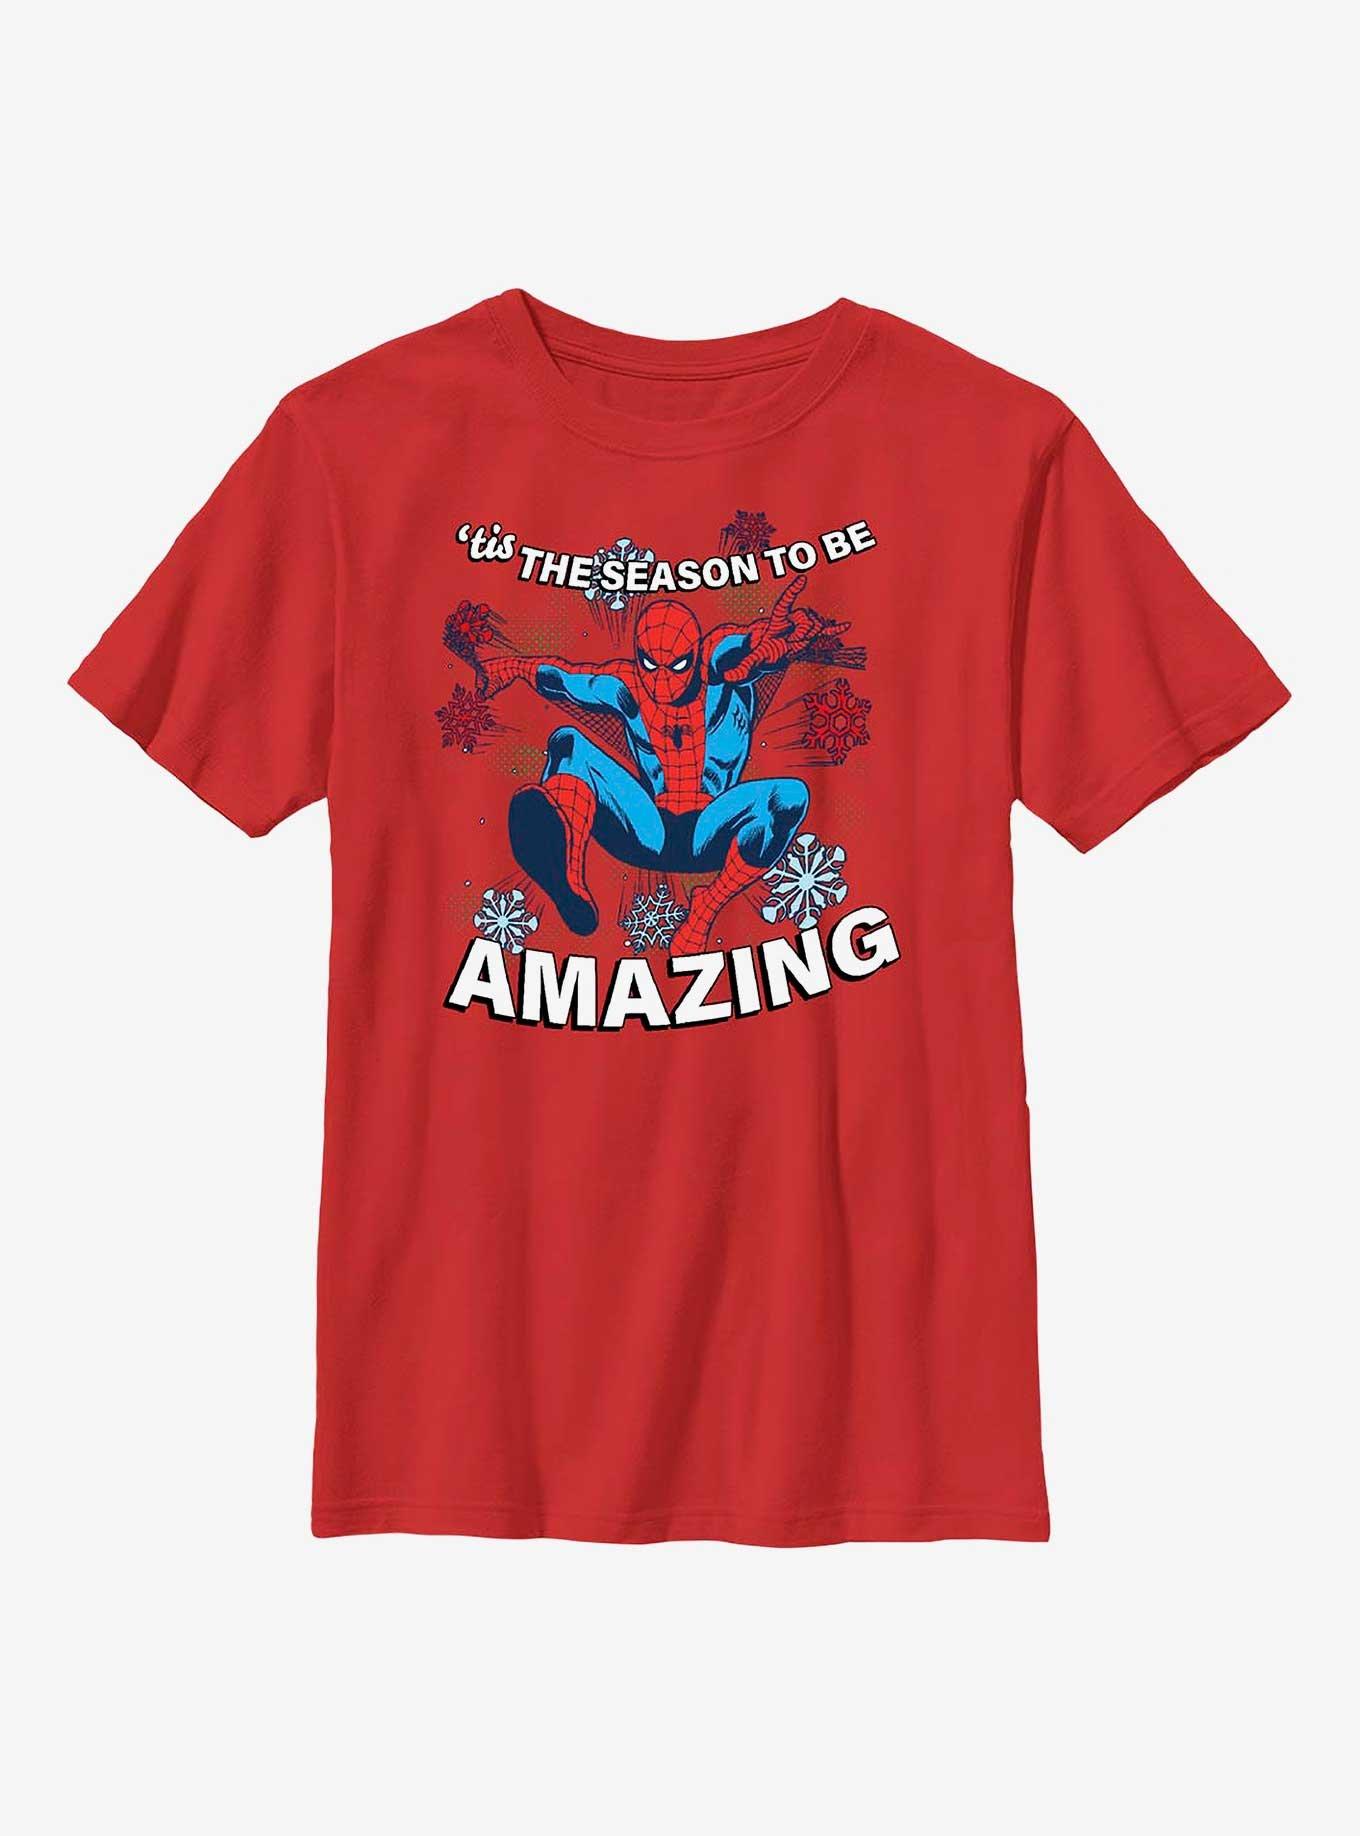 Marvel Holiday Spider-Man Youth T-Shirt, RED, hi-res